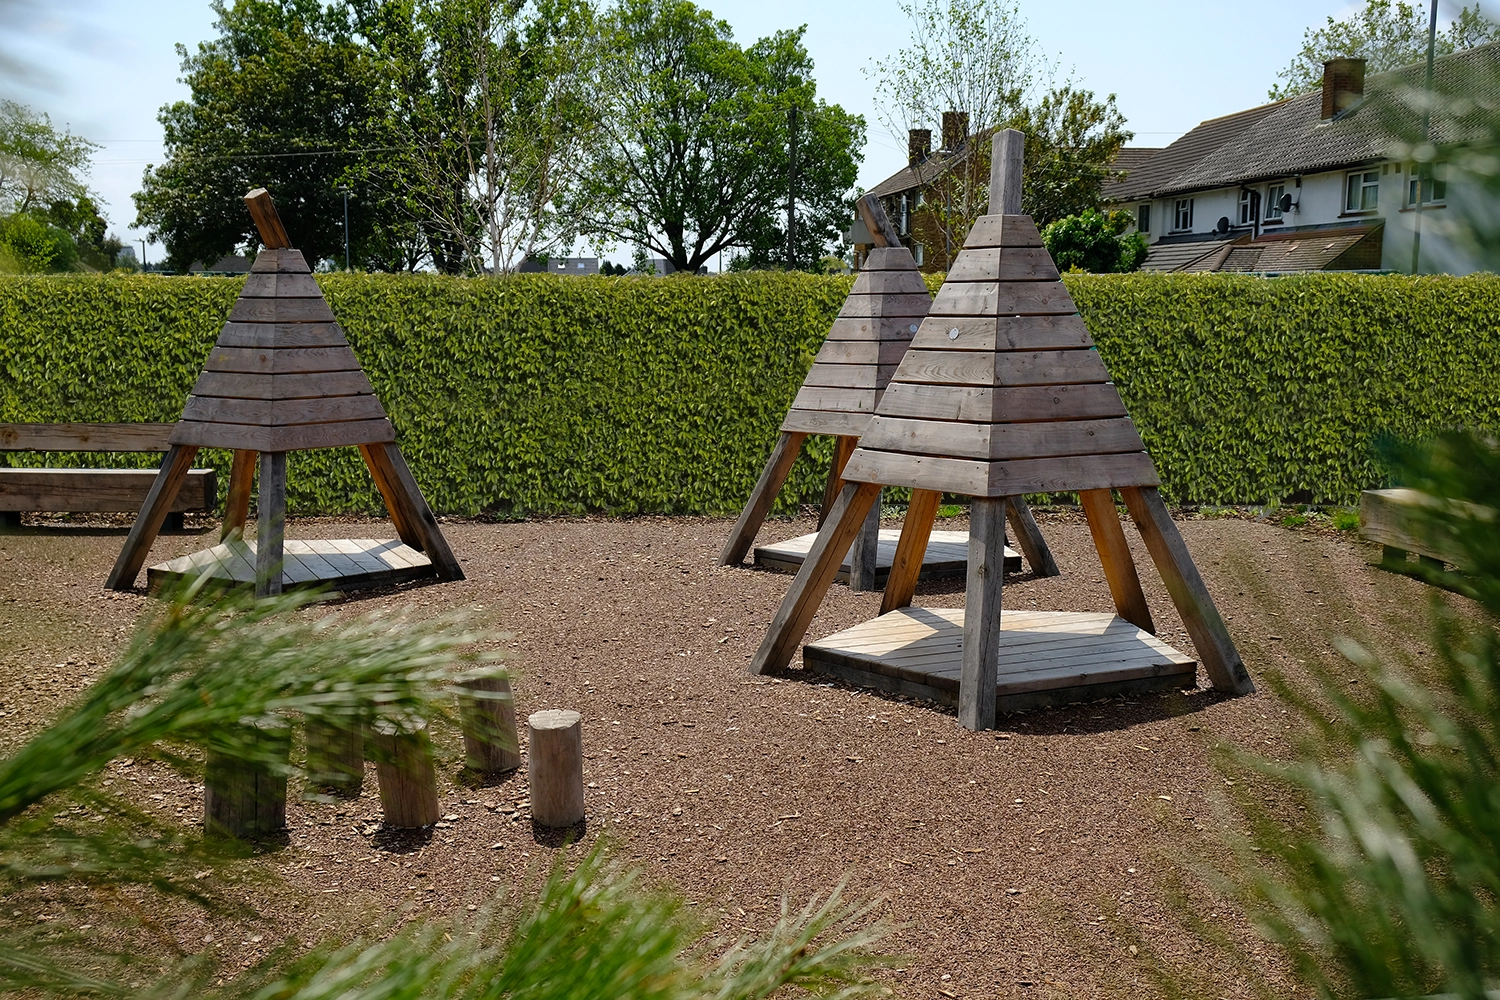 Wooden Teepee Group